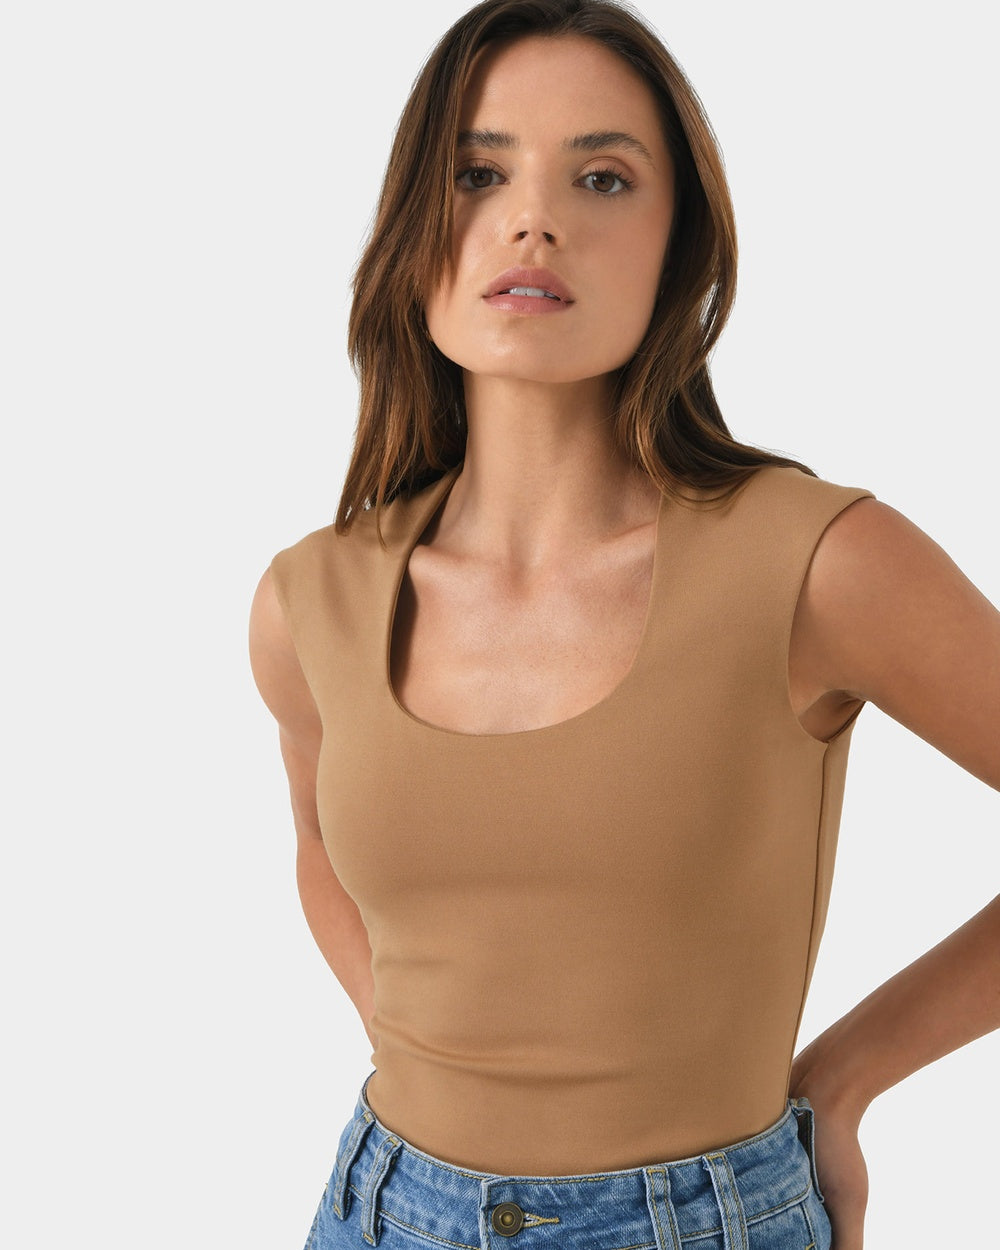 Beige Rounded Square neck top